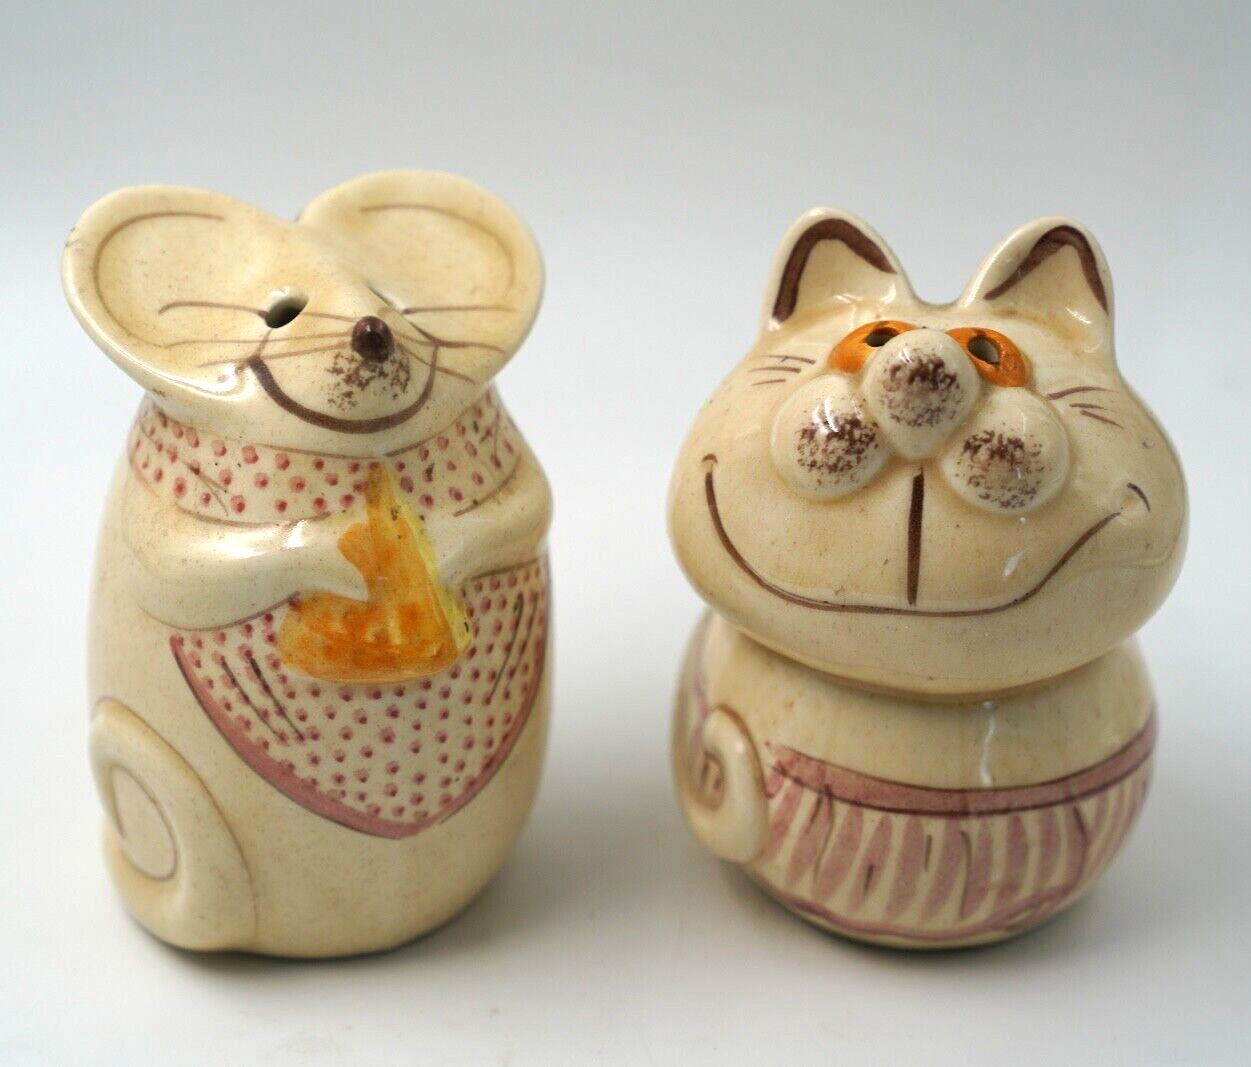 NS Gustin Co Pottery Cat Cheese Shaker Ceramic Smiling Kitty Vintage dry stopper